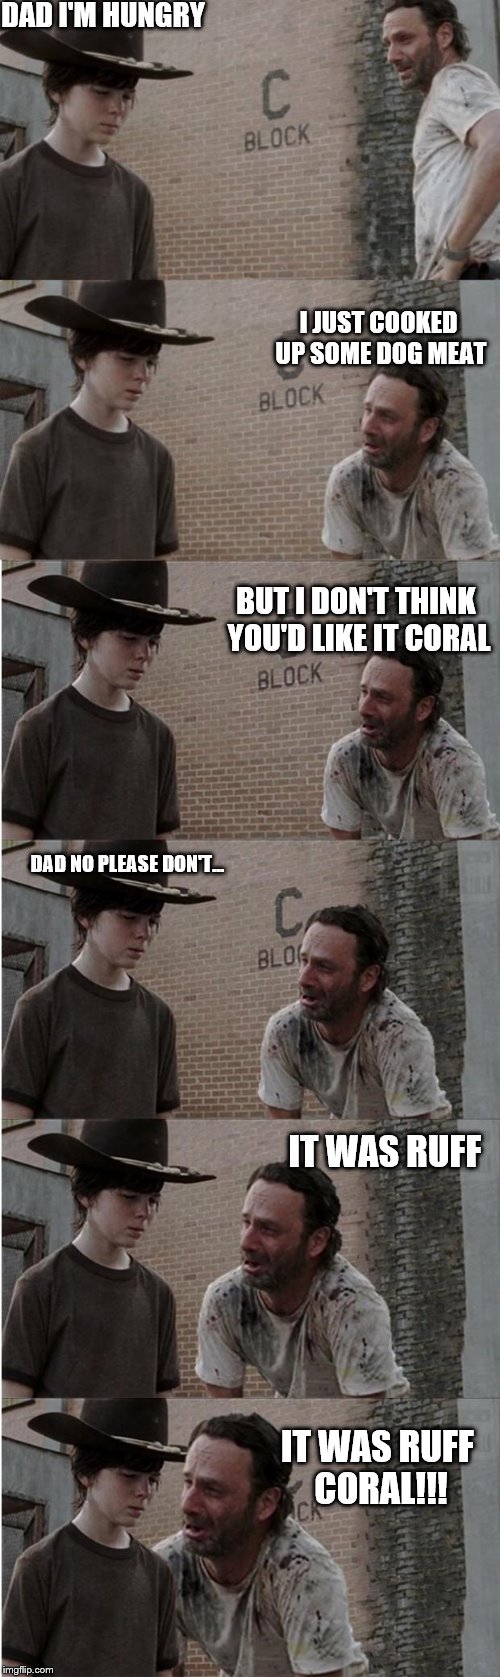 Rick and Carl Longer Meme | DAD I'M HUNGRY; I JUST COOKED UP SOME DOG MEAT; BUT I DON'T THINK YOU'D LIKE IT CORAL; DAD NO PLEASE DON'T... IT WAS RUFF; IT WAS RUFF CORAL!!! | image tagged in memes,rick and carl longer | made w/ Imgflip meme maker